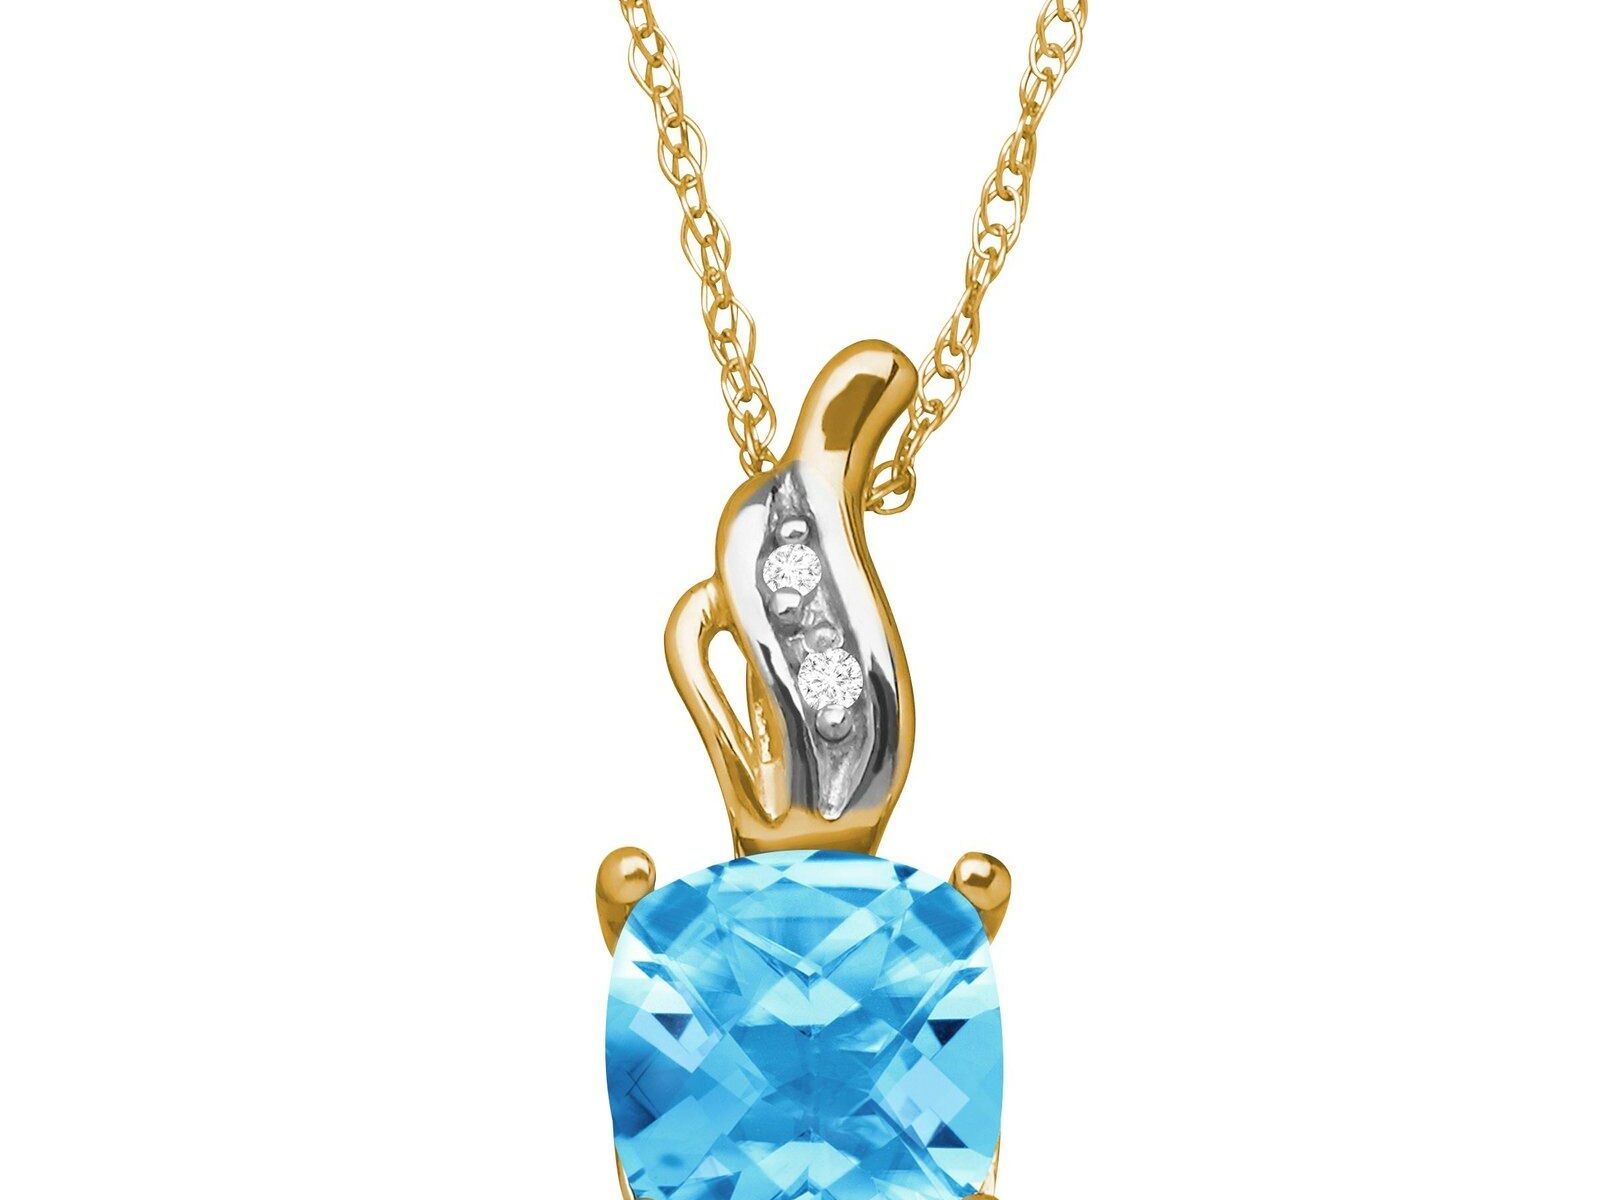 1 1/5 ct Natural Swiss Blue Topaz Pendant with Diamonds in 10K Gold